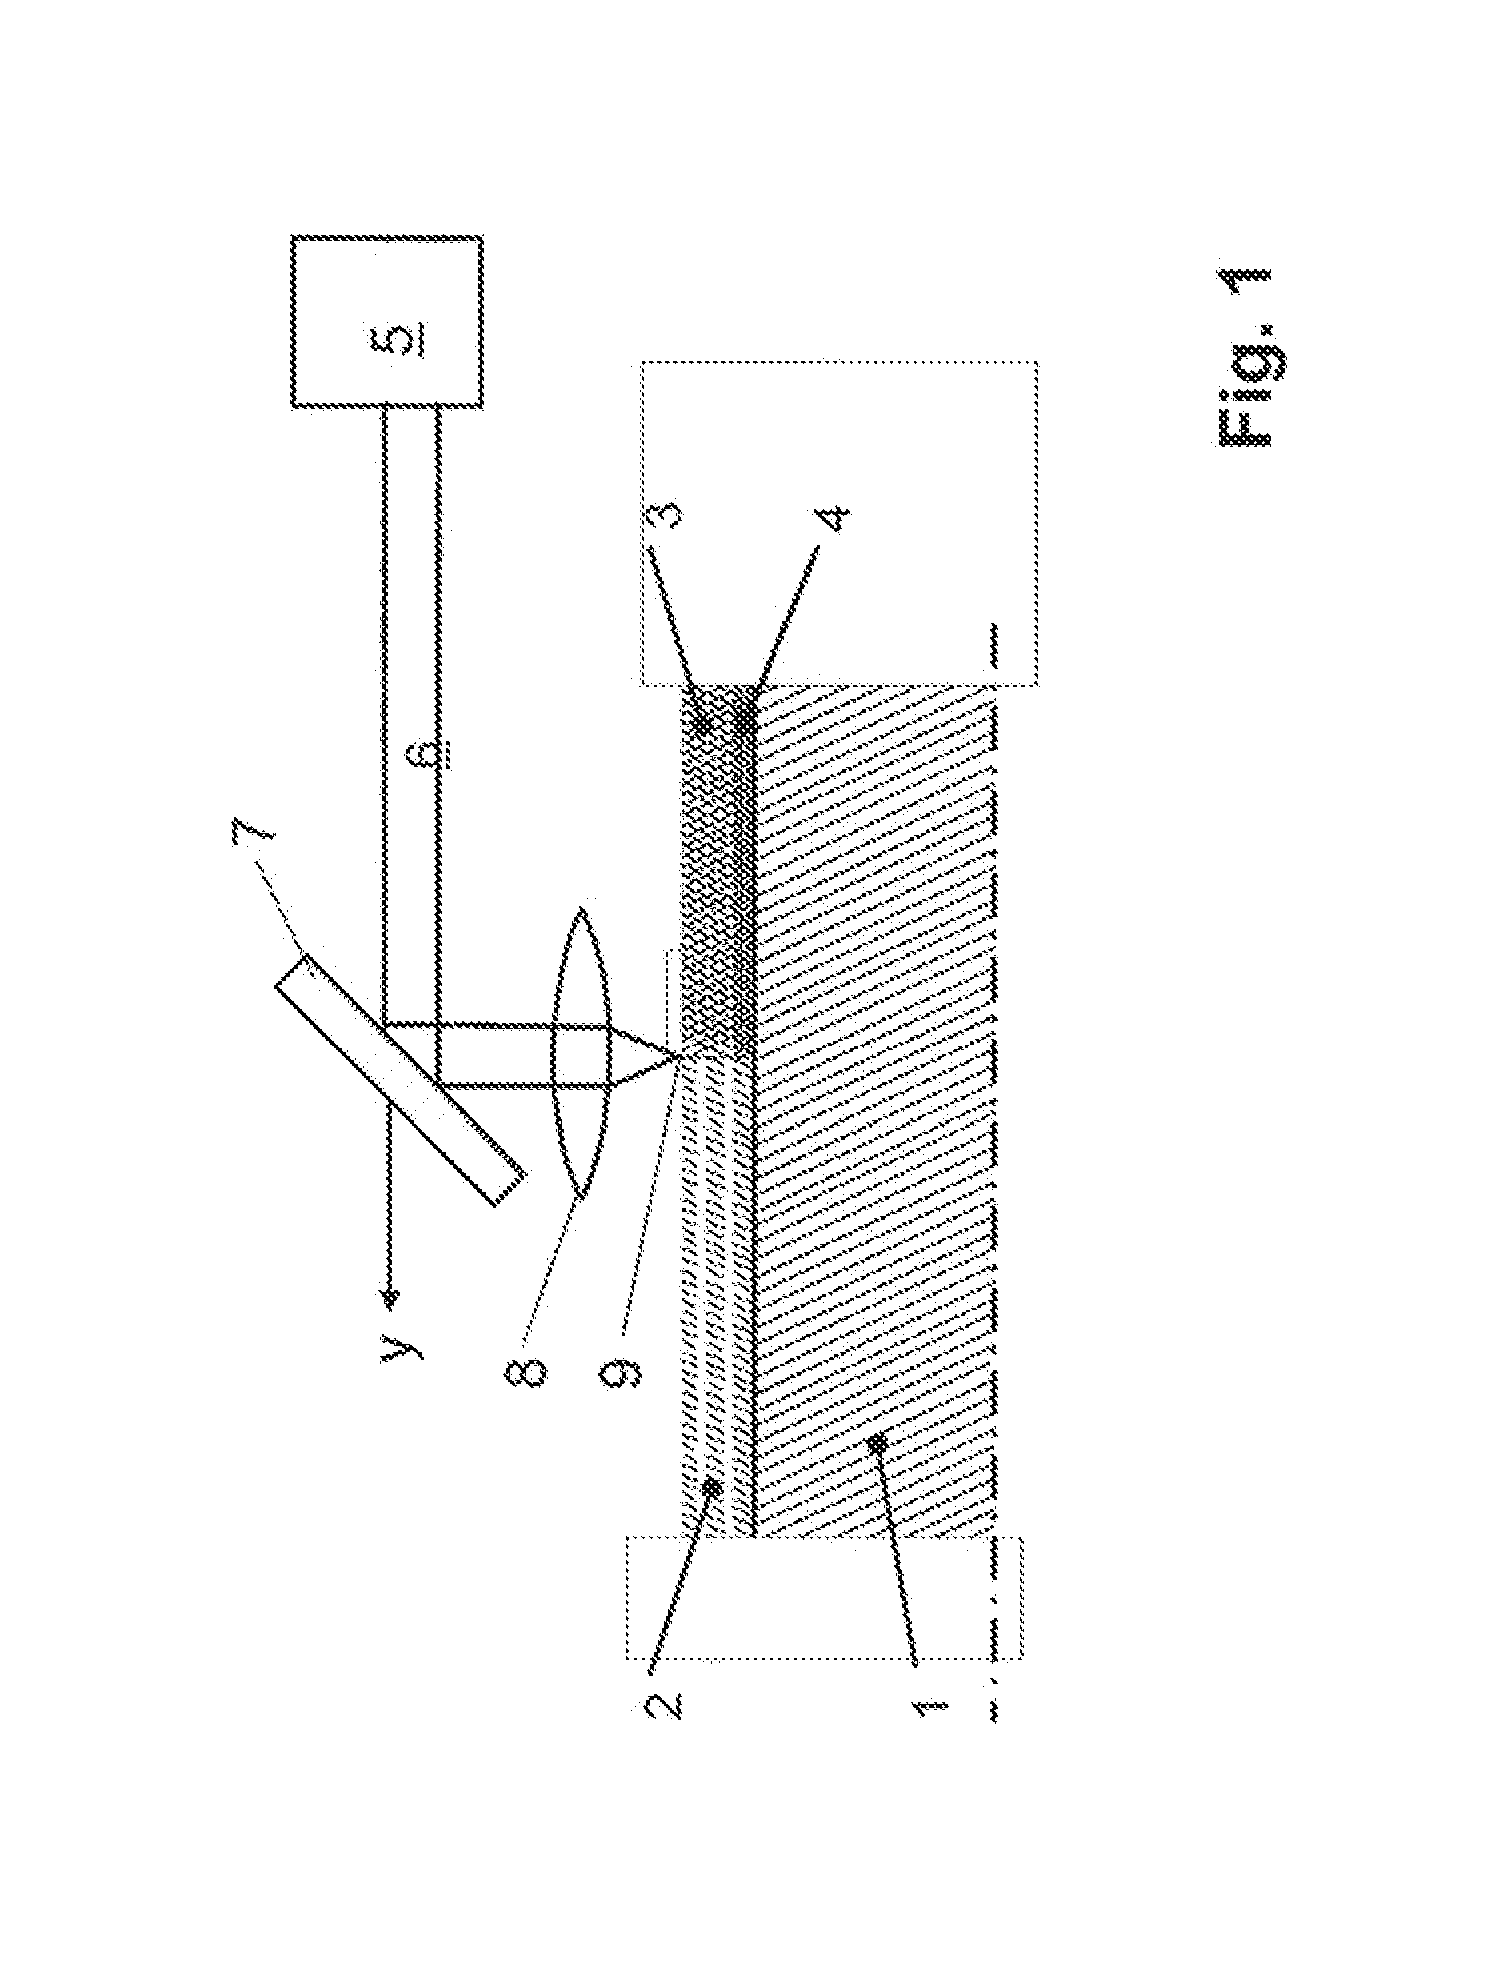 Method for enhancing corrosion resistance of a metallic coating on a steel strip or plate